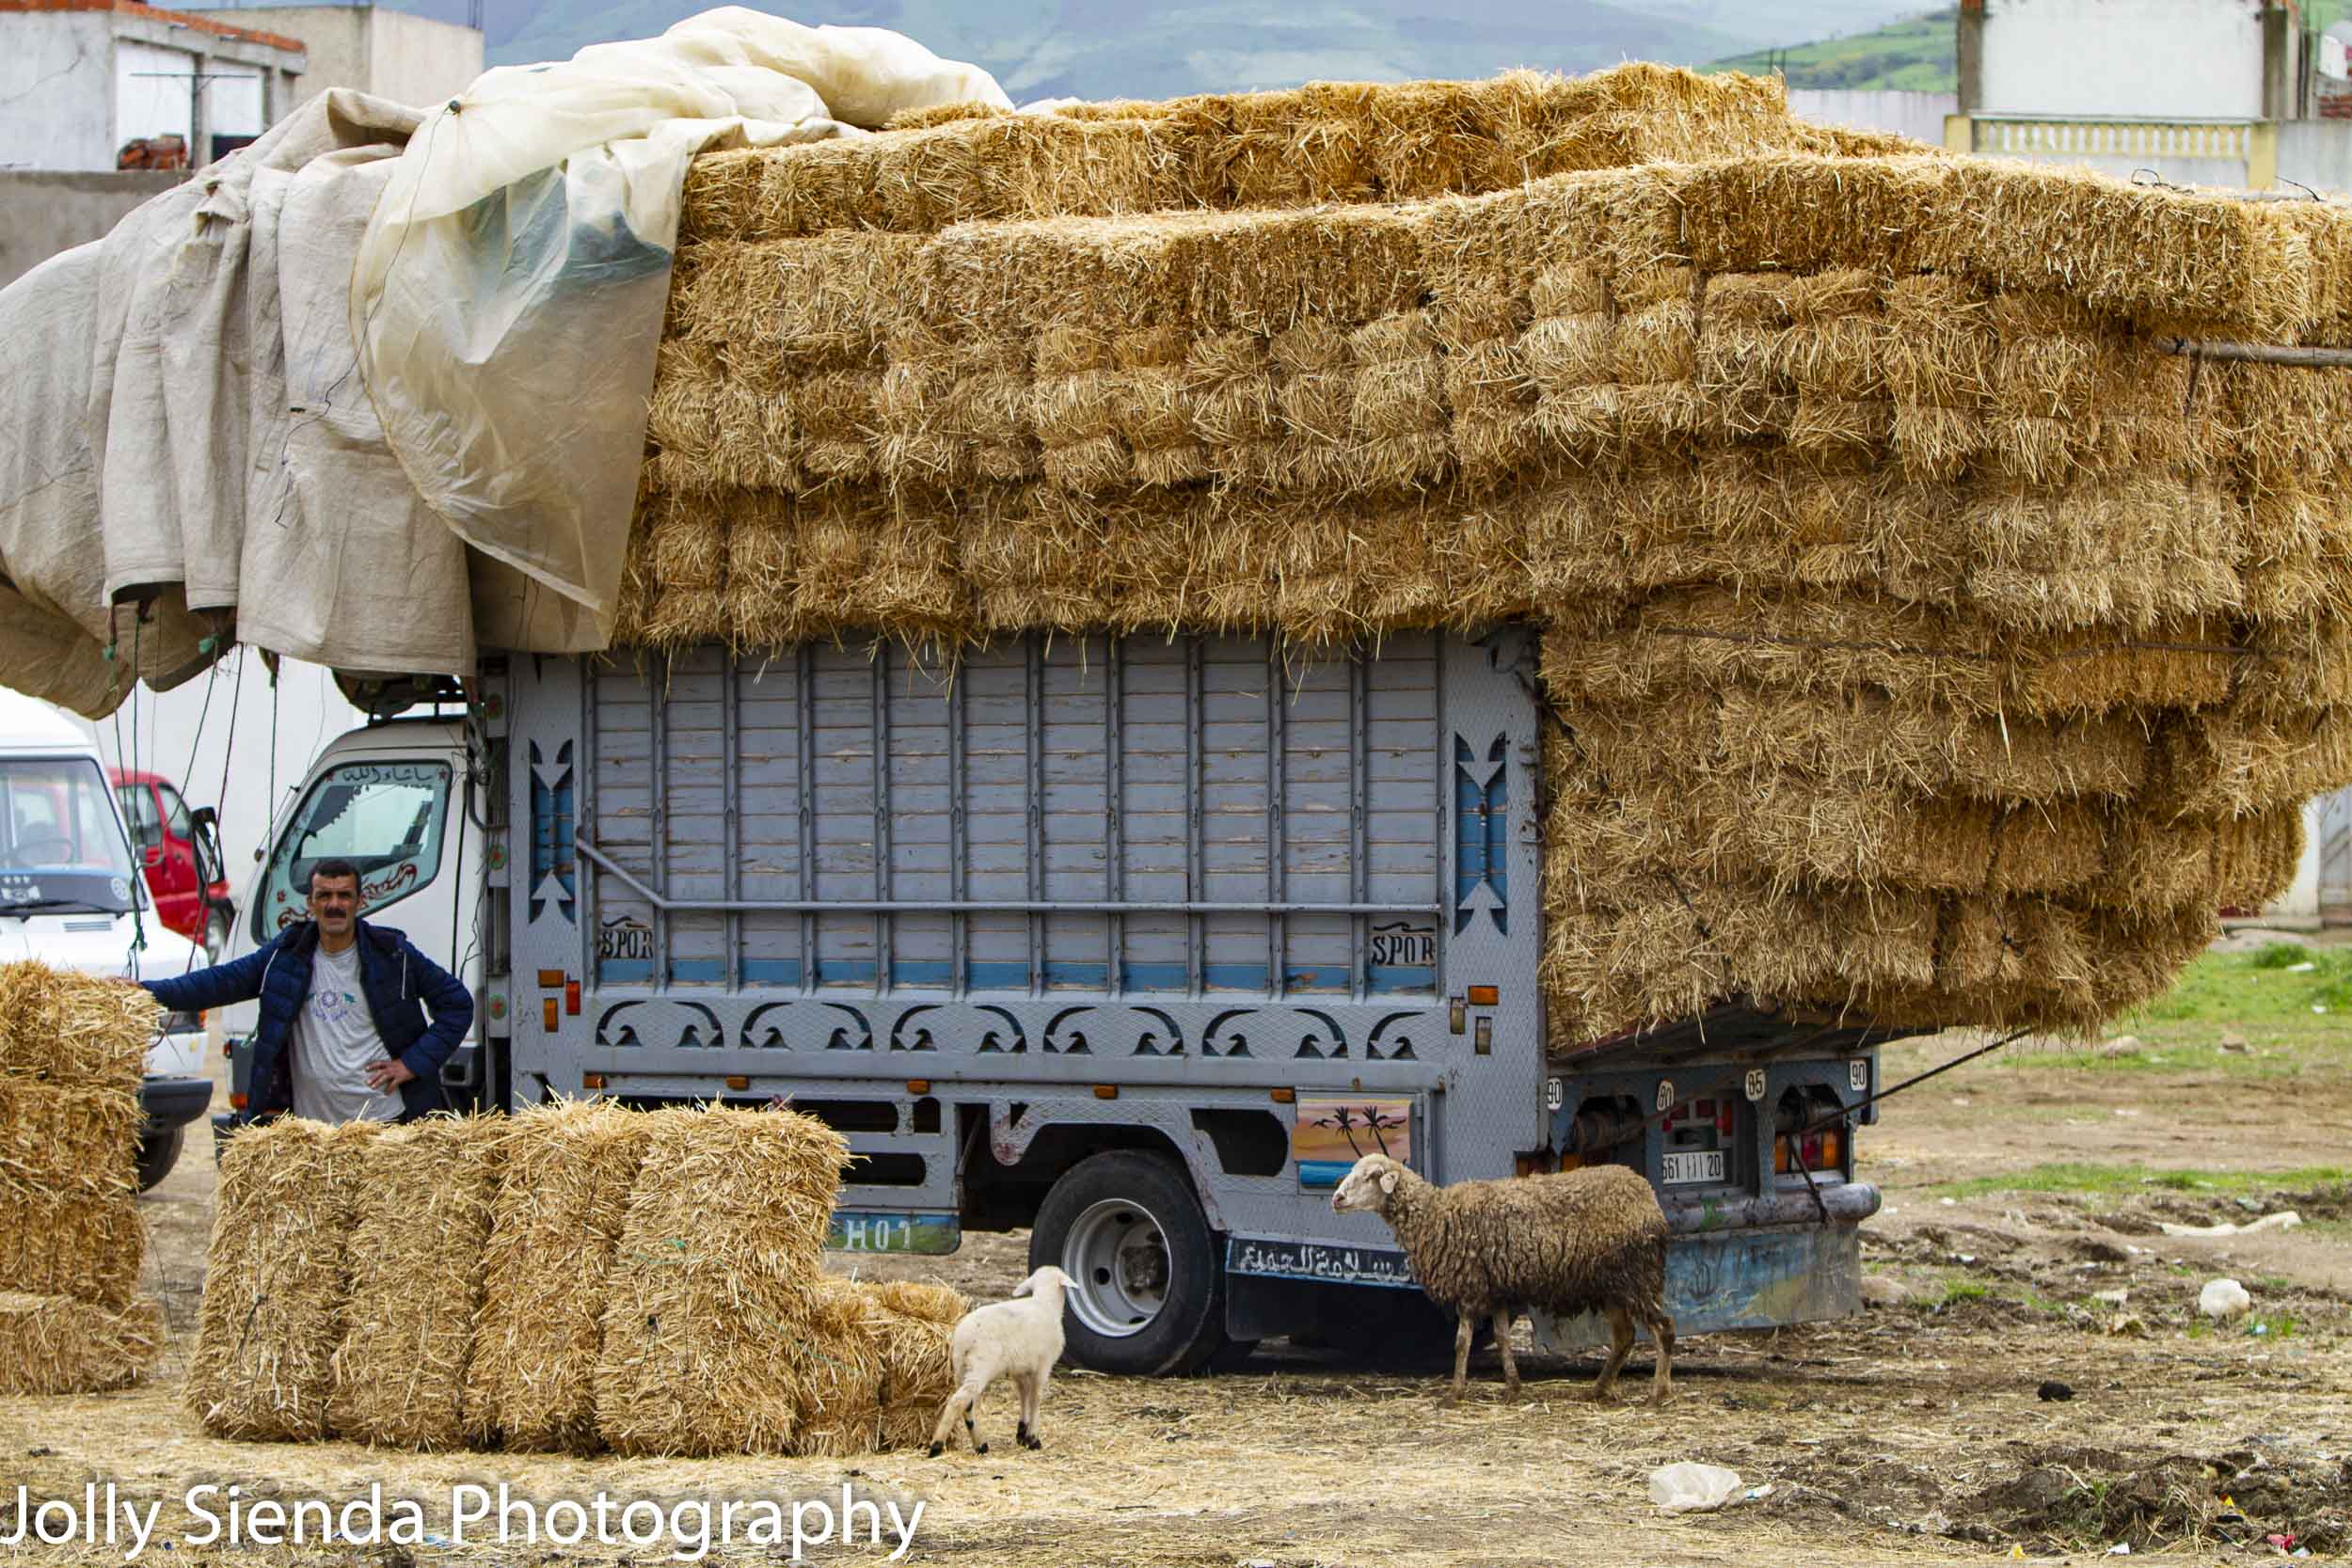 Truck piled high with hay and sheep